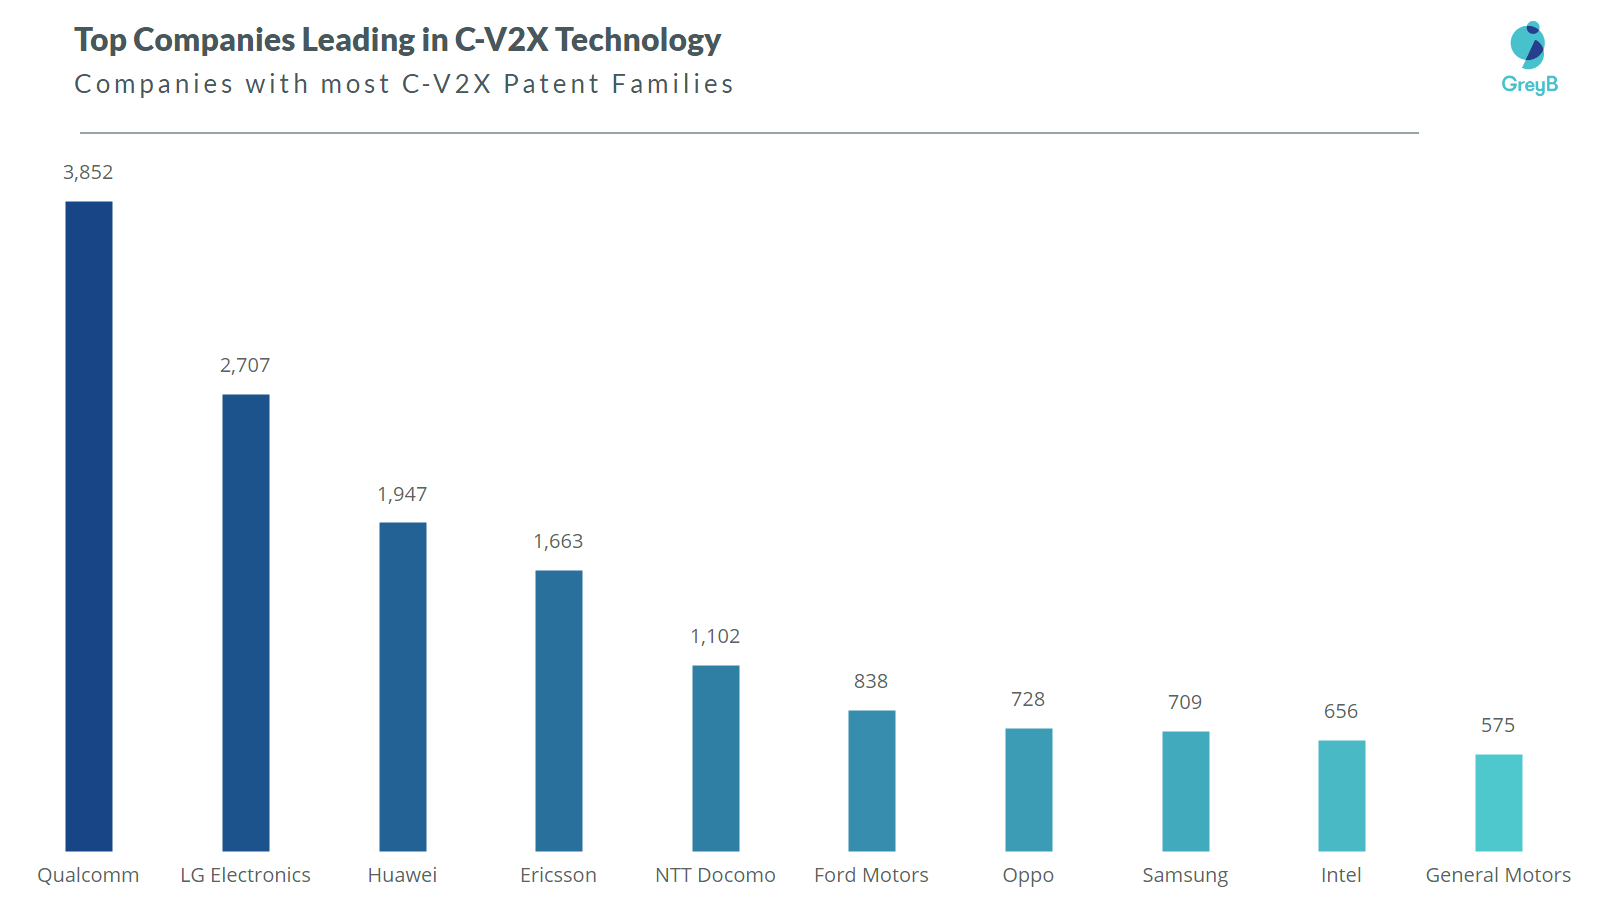 Companies with most C-V2X patents